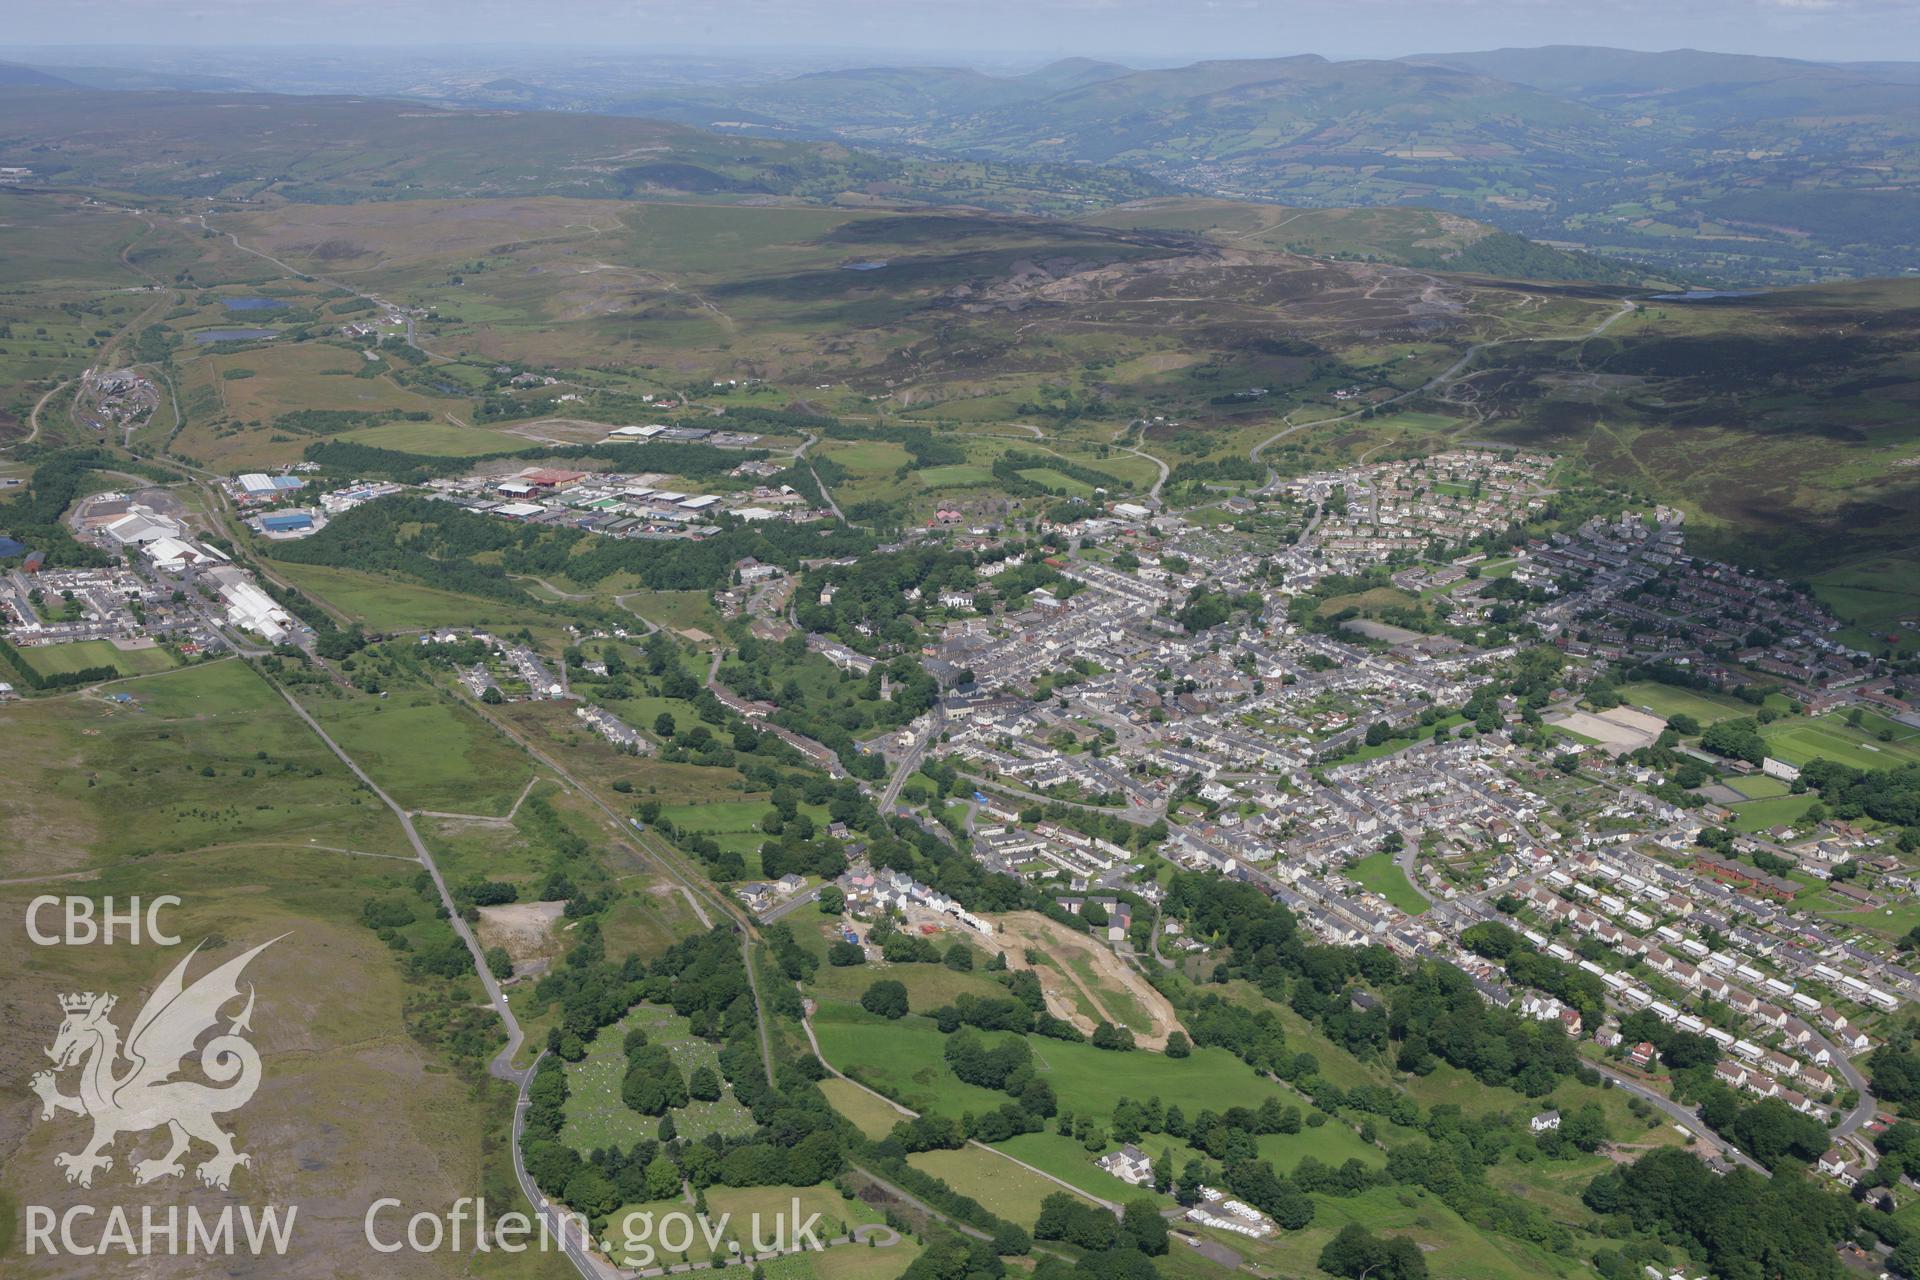 RCAHMW colour oblique photograph of Blaenavon townscape, from the south-east. Taken by Toby Driver on 21/07/2008.